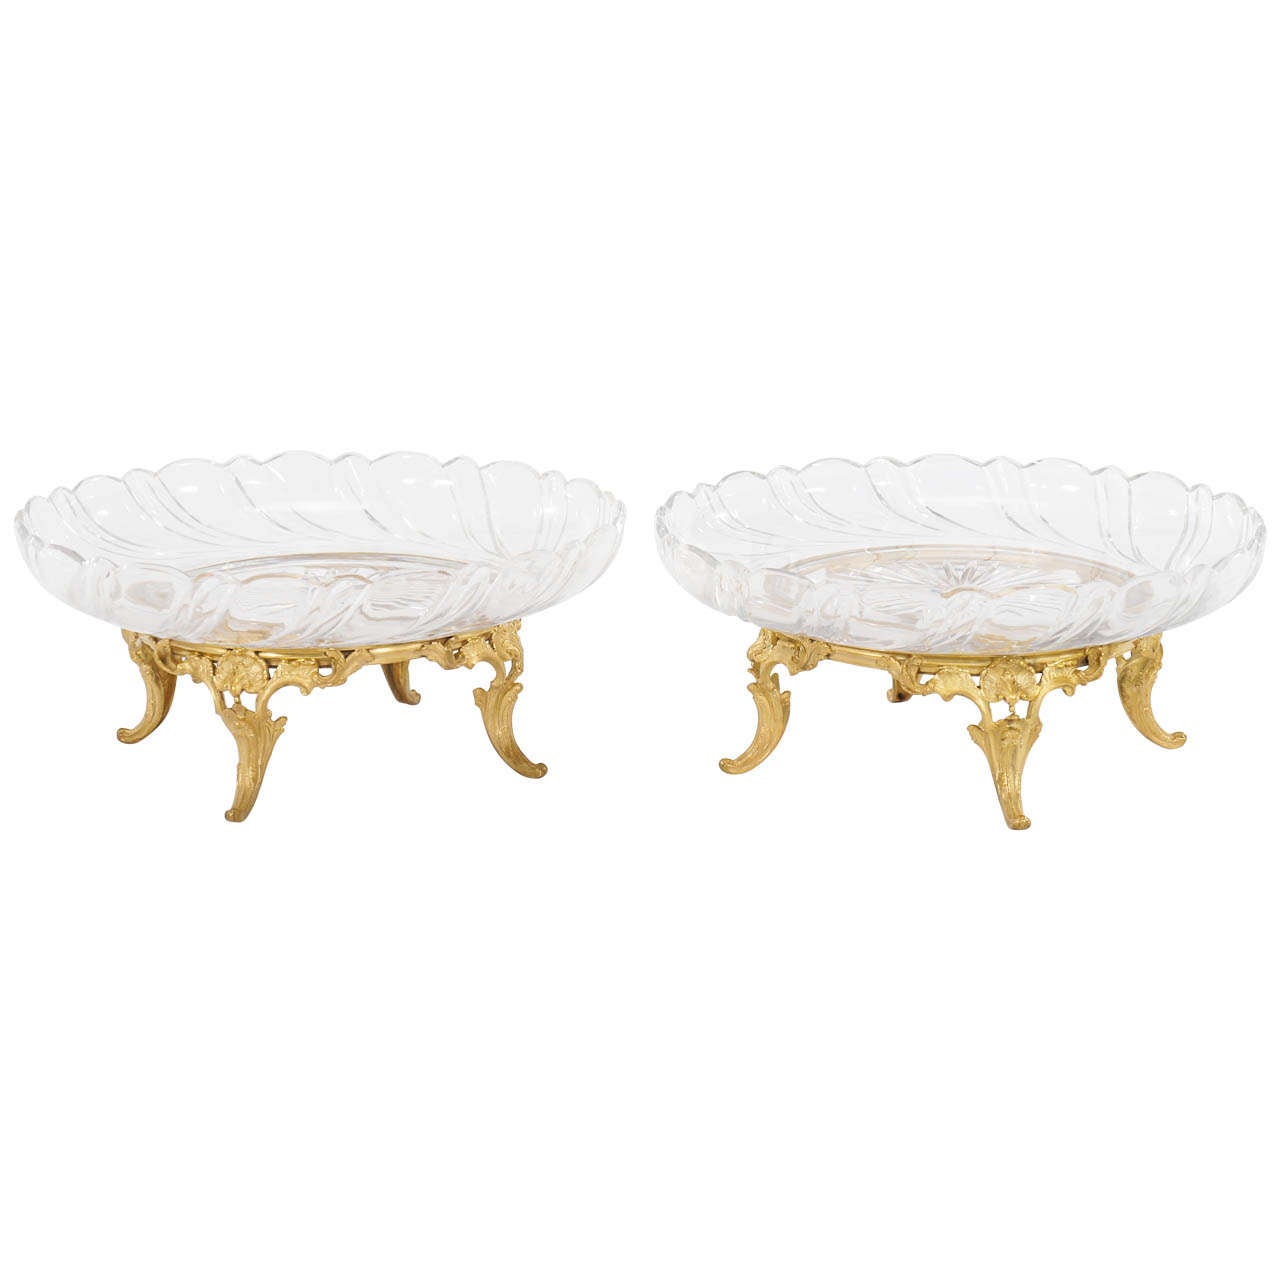 Pair of 19th c. Baccarat Cut Crystal Tazzas in Gold D'ore Stands